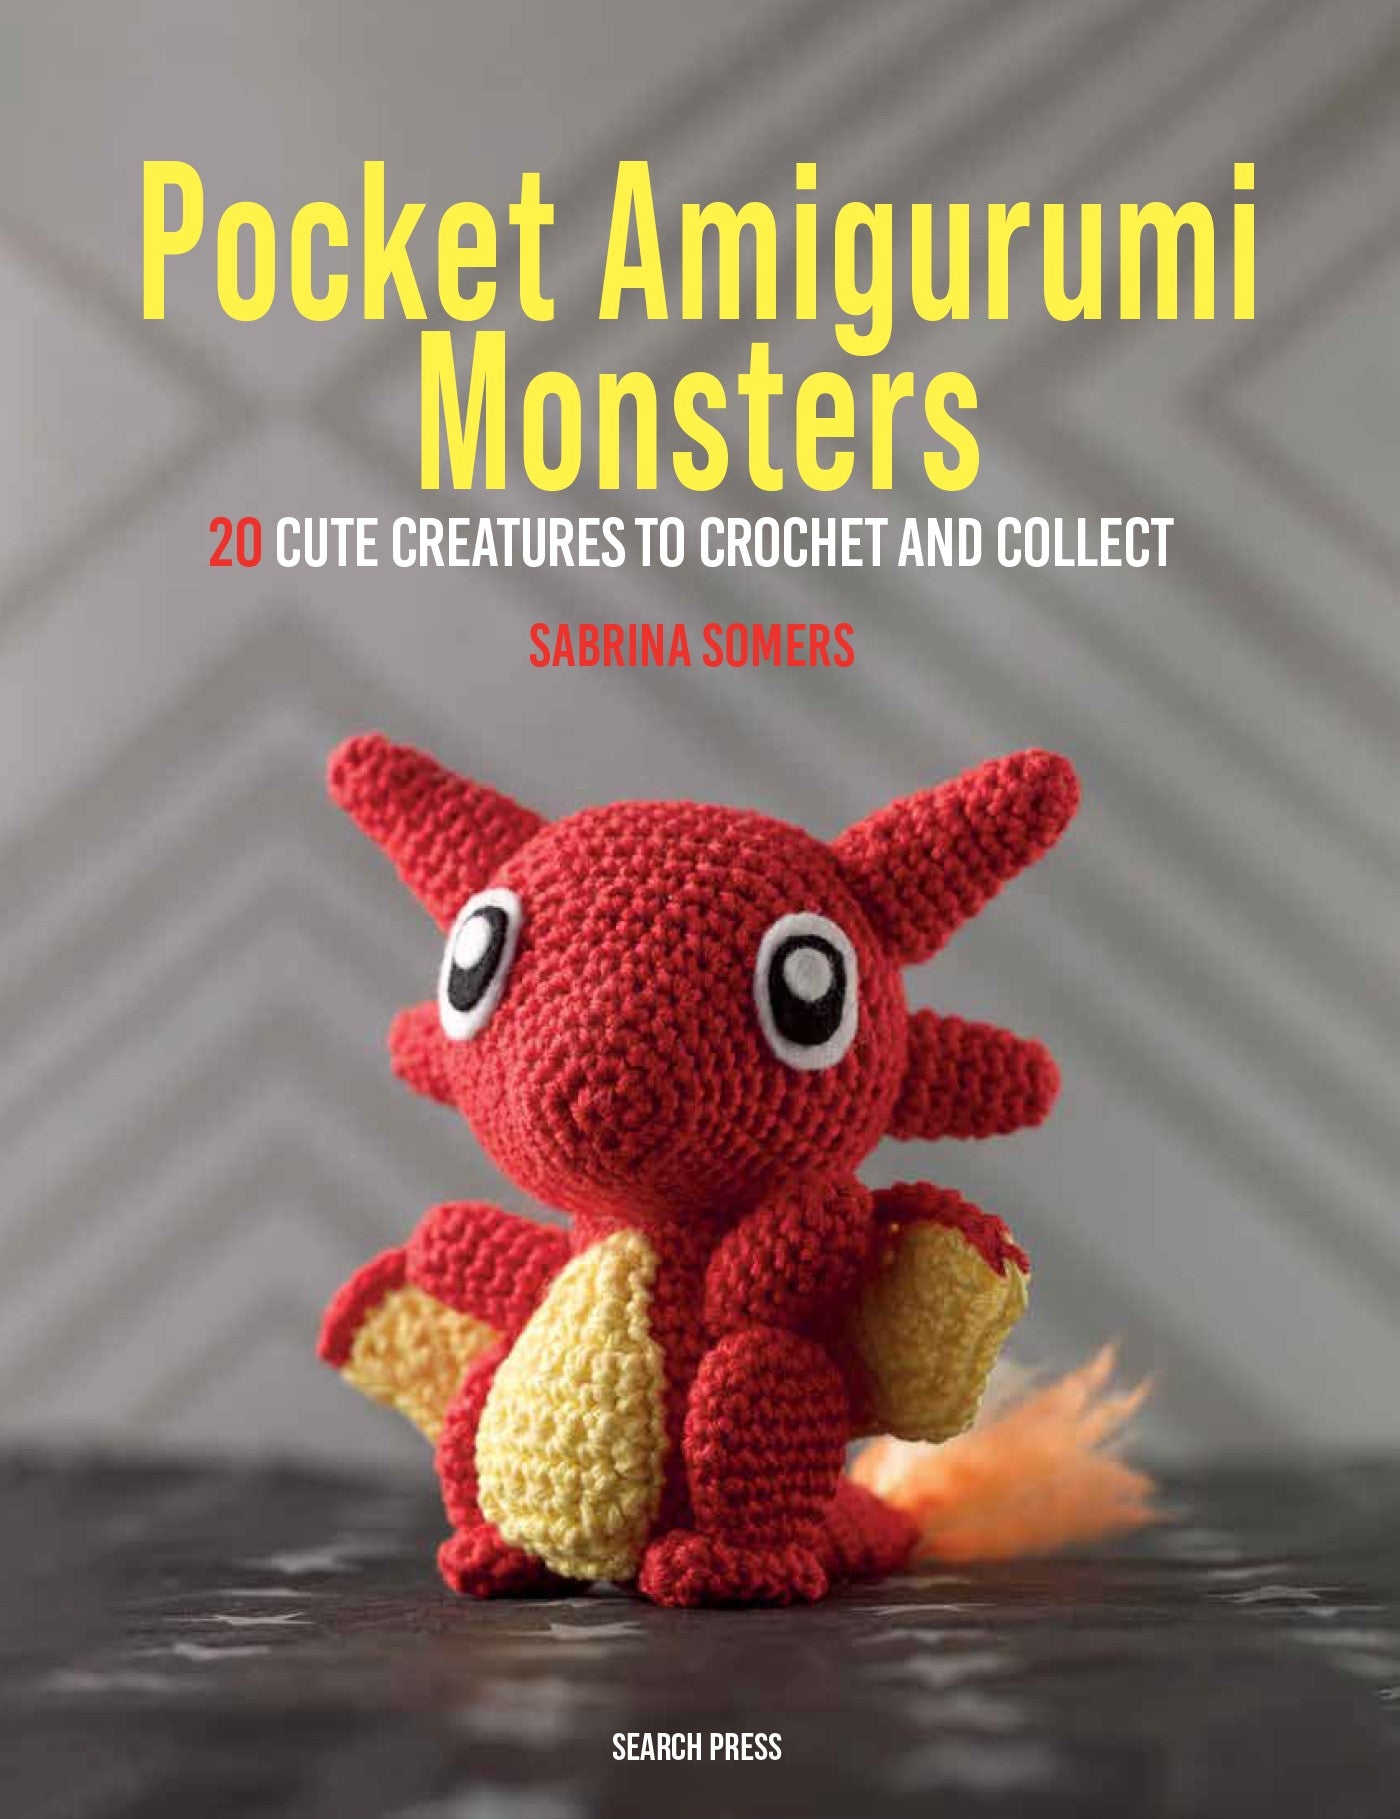 Pocket Amigurumi Monsters: 20 Cute Creatures to Crochet and Collect